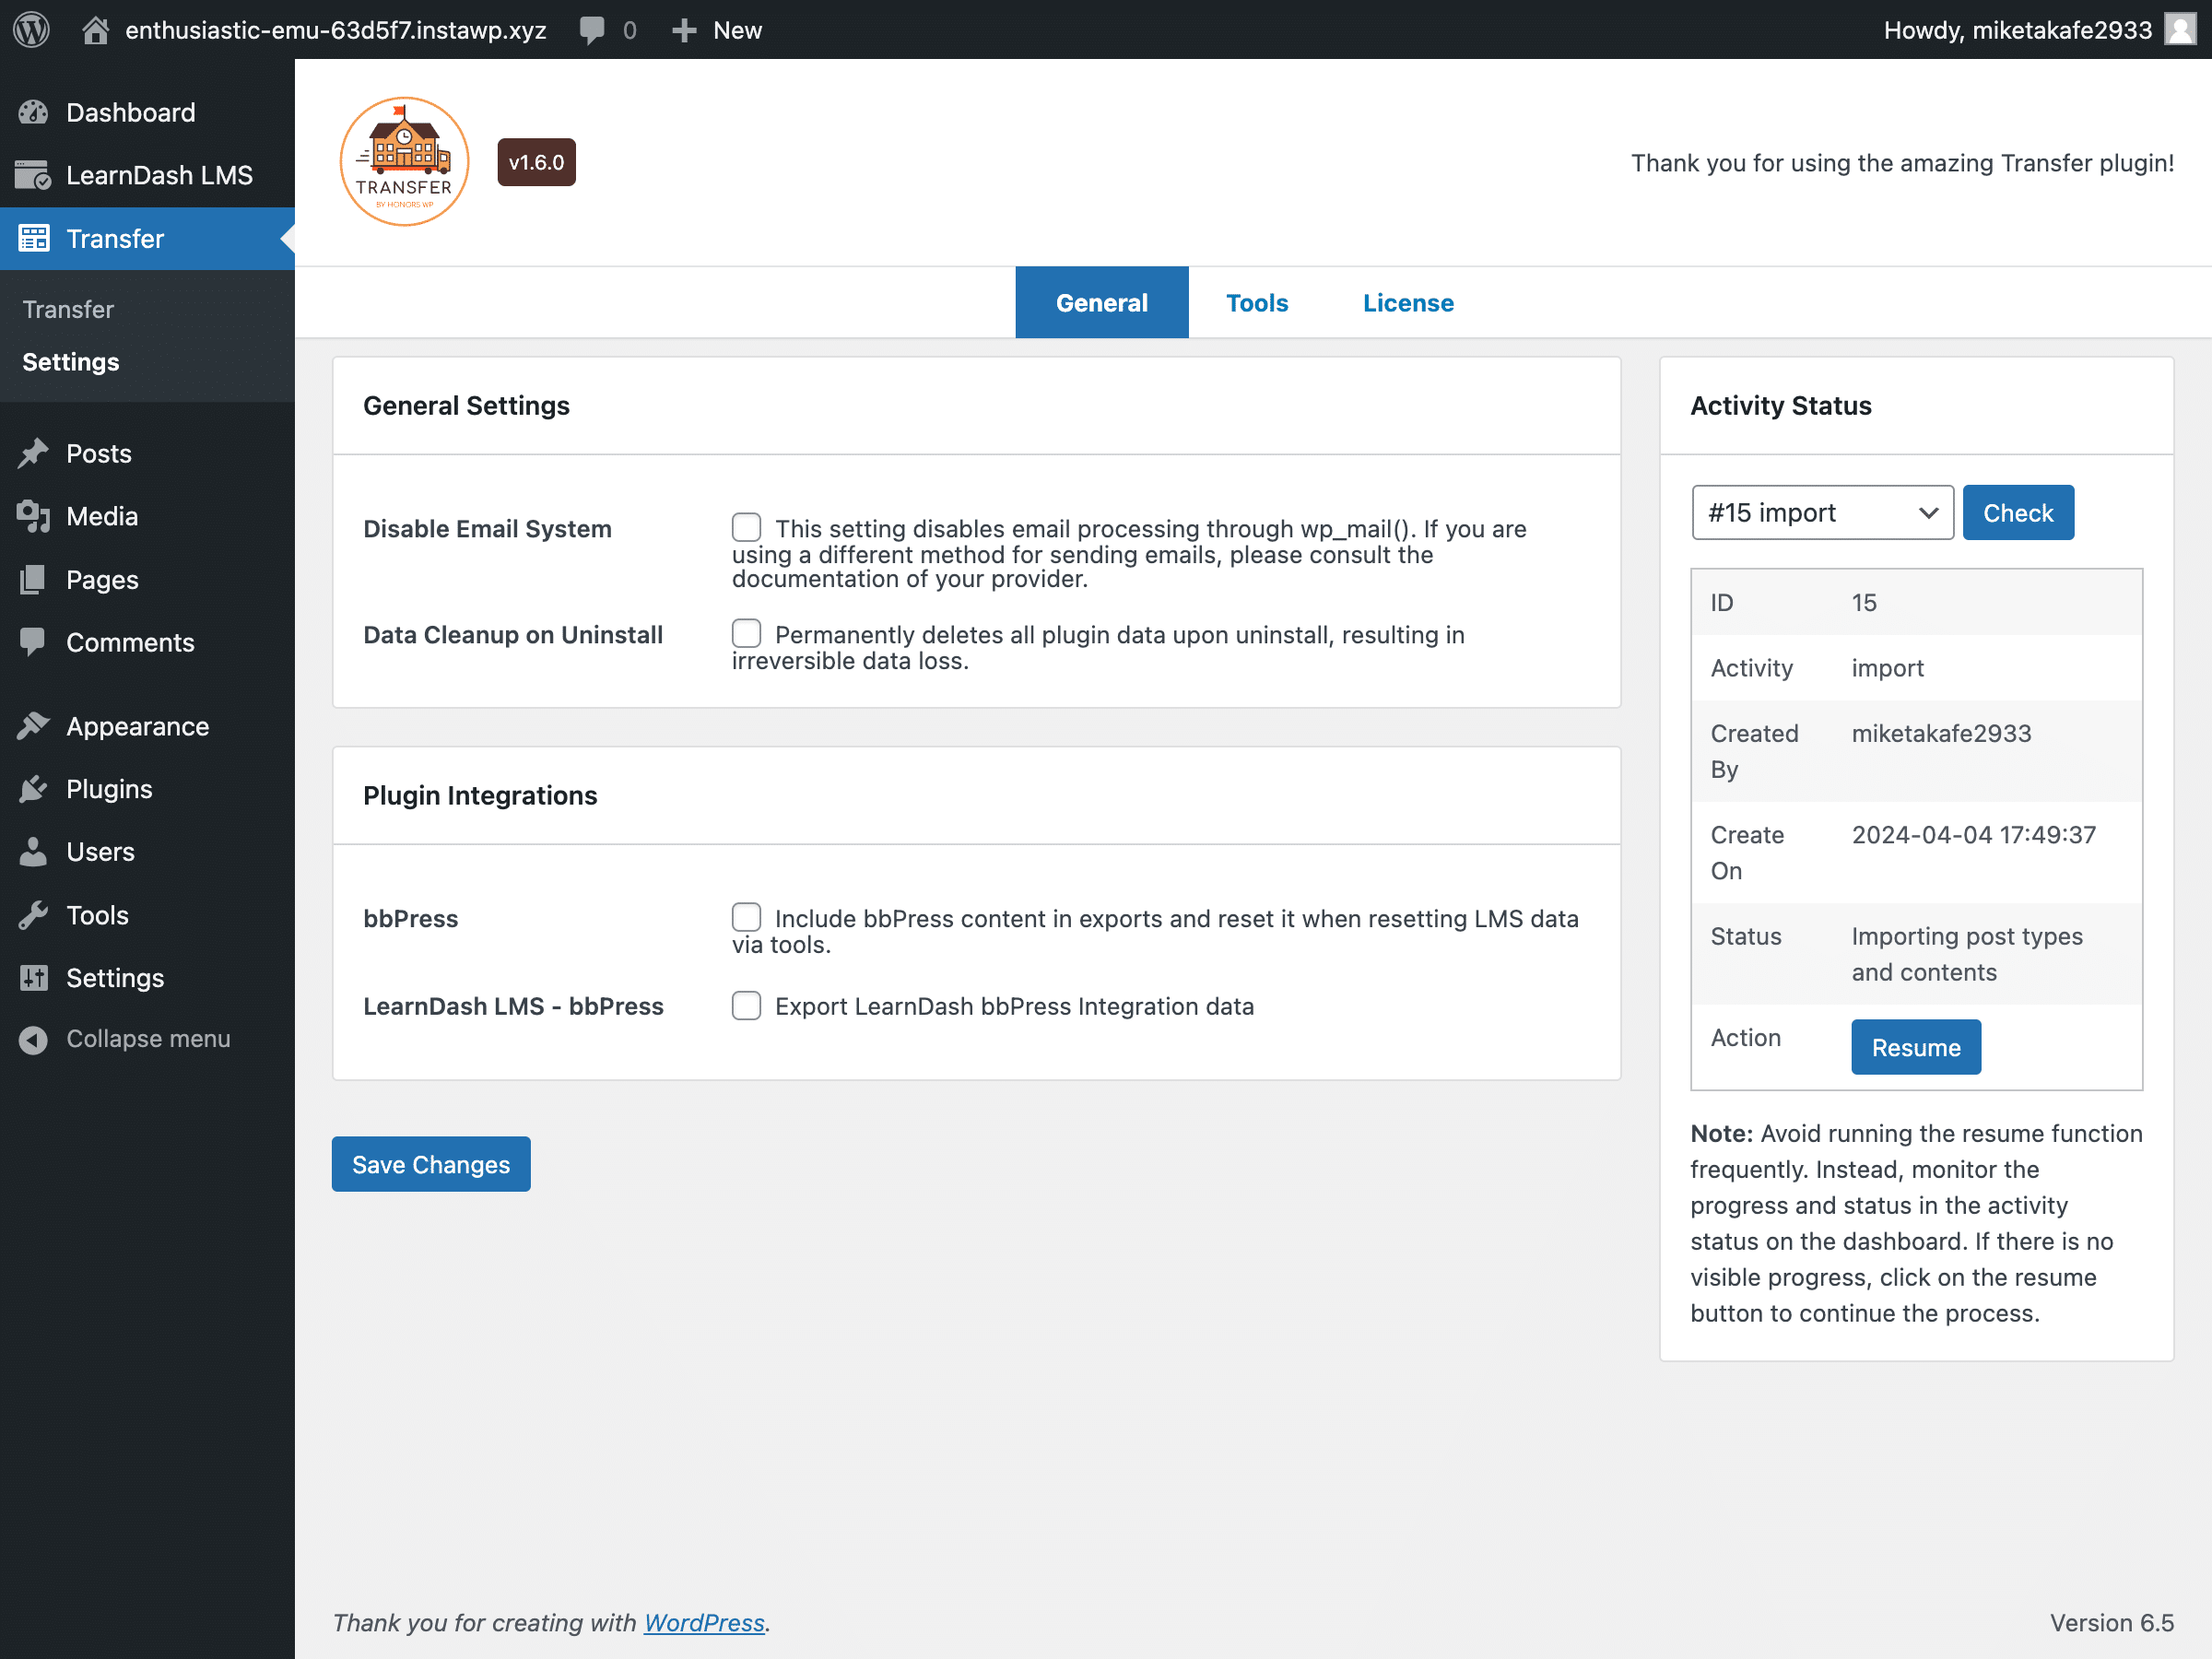 WordPress Transfer plugin showing the Settings menu and the option to resume an import process if the event the process stalls.